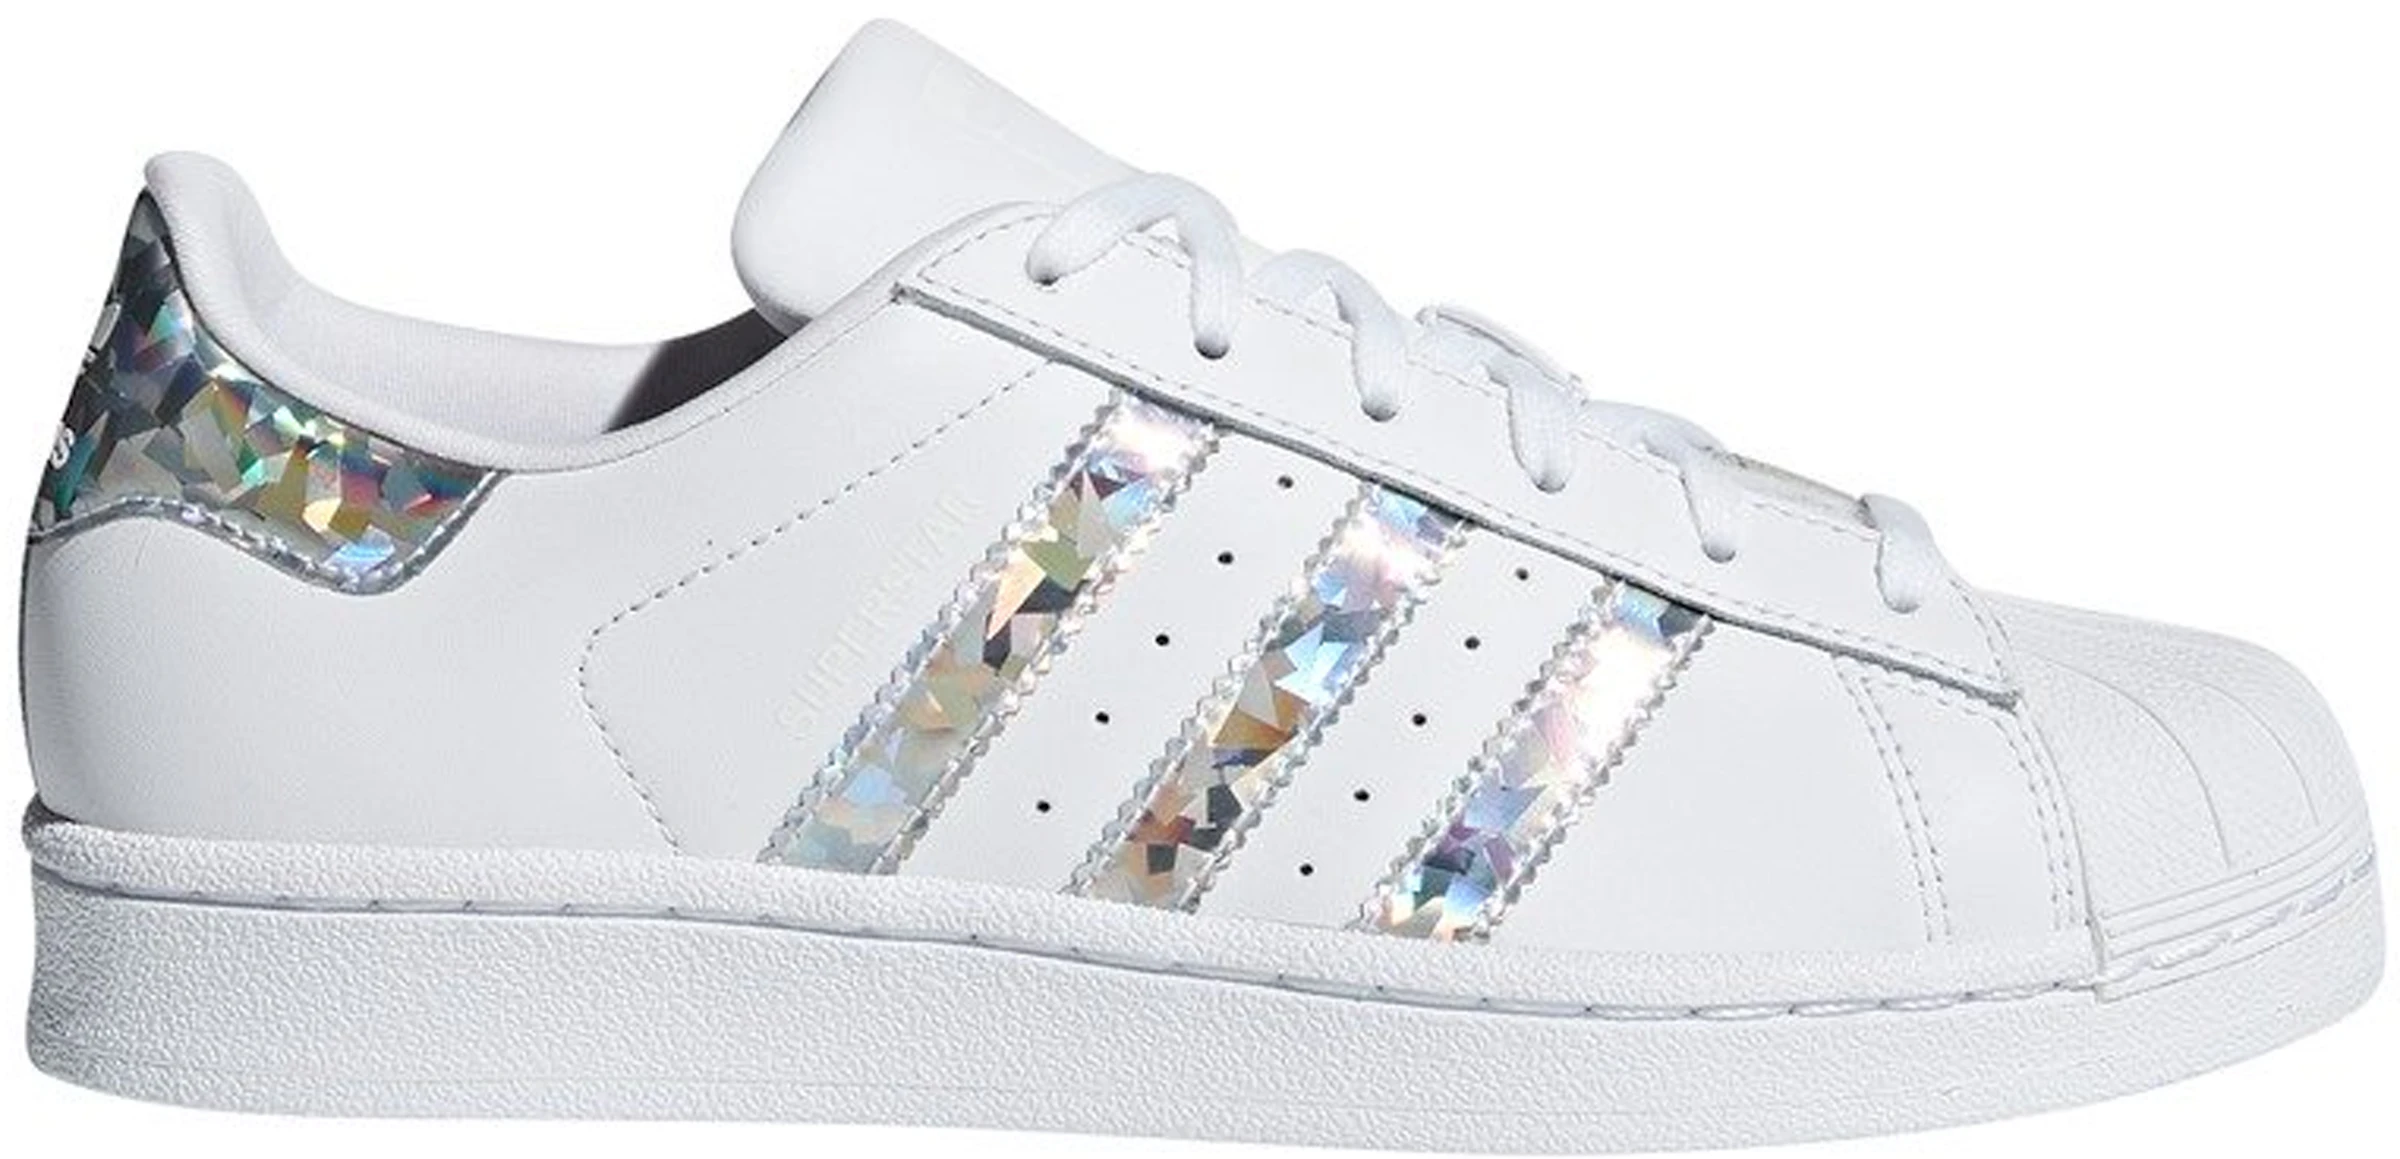 adidas Superstar White Holographic Stripes (Youth) - F33889 - GB